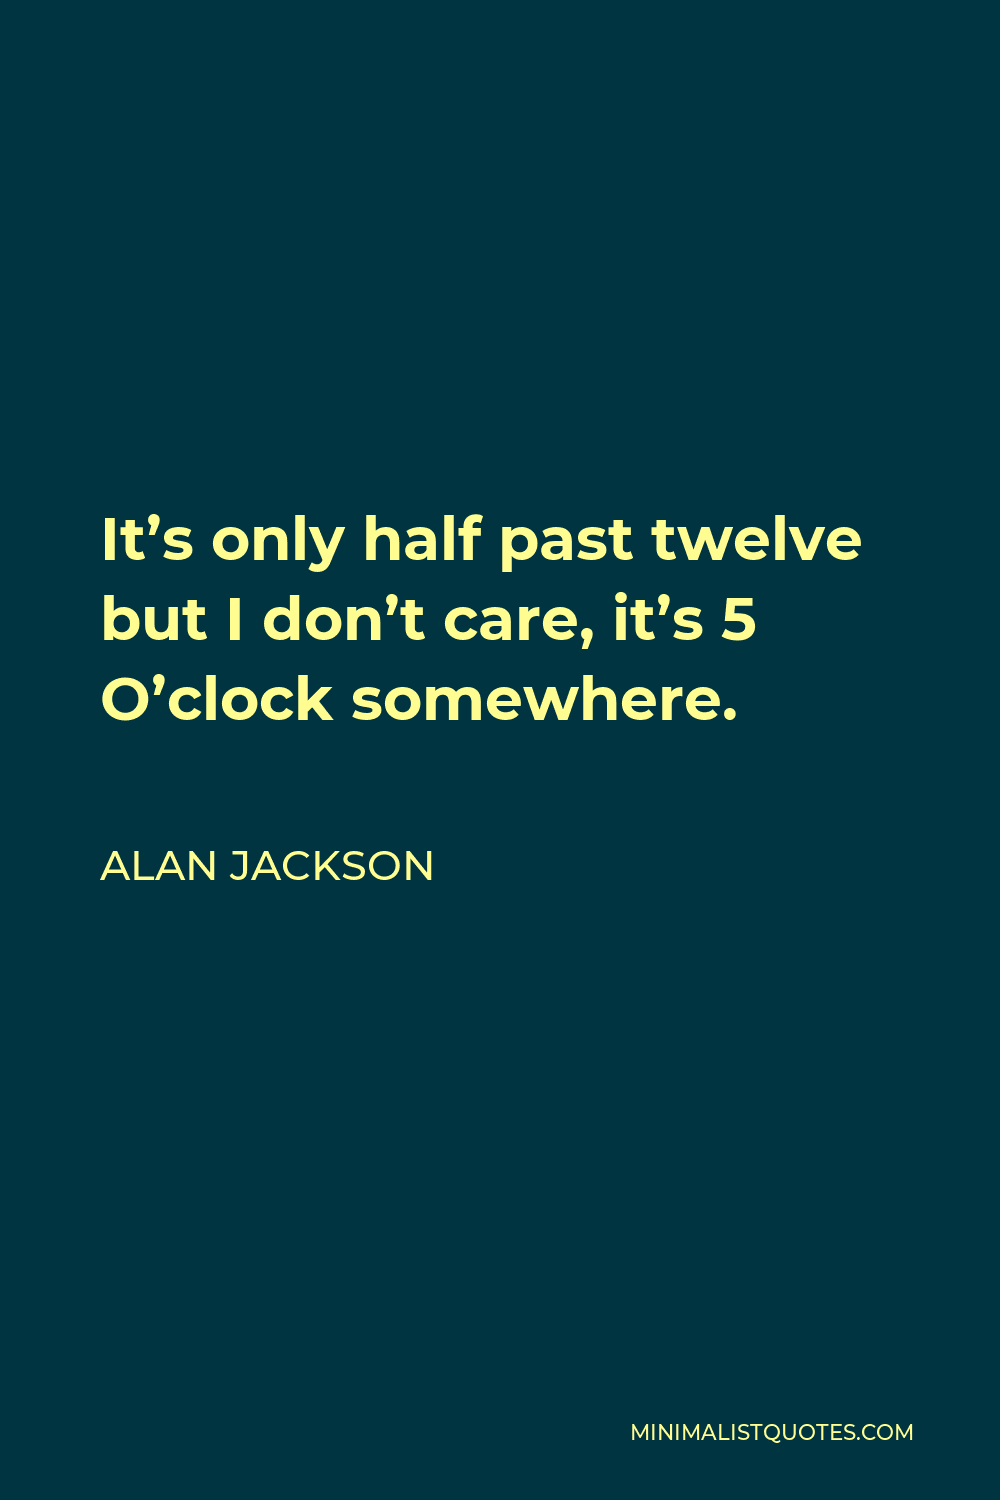 Alan Jackson Quote - It’s only half past twelve but I don’t care, it’s 5 O’clock somewhere.